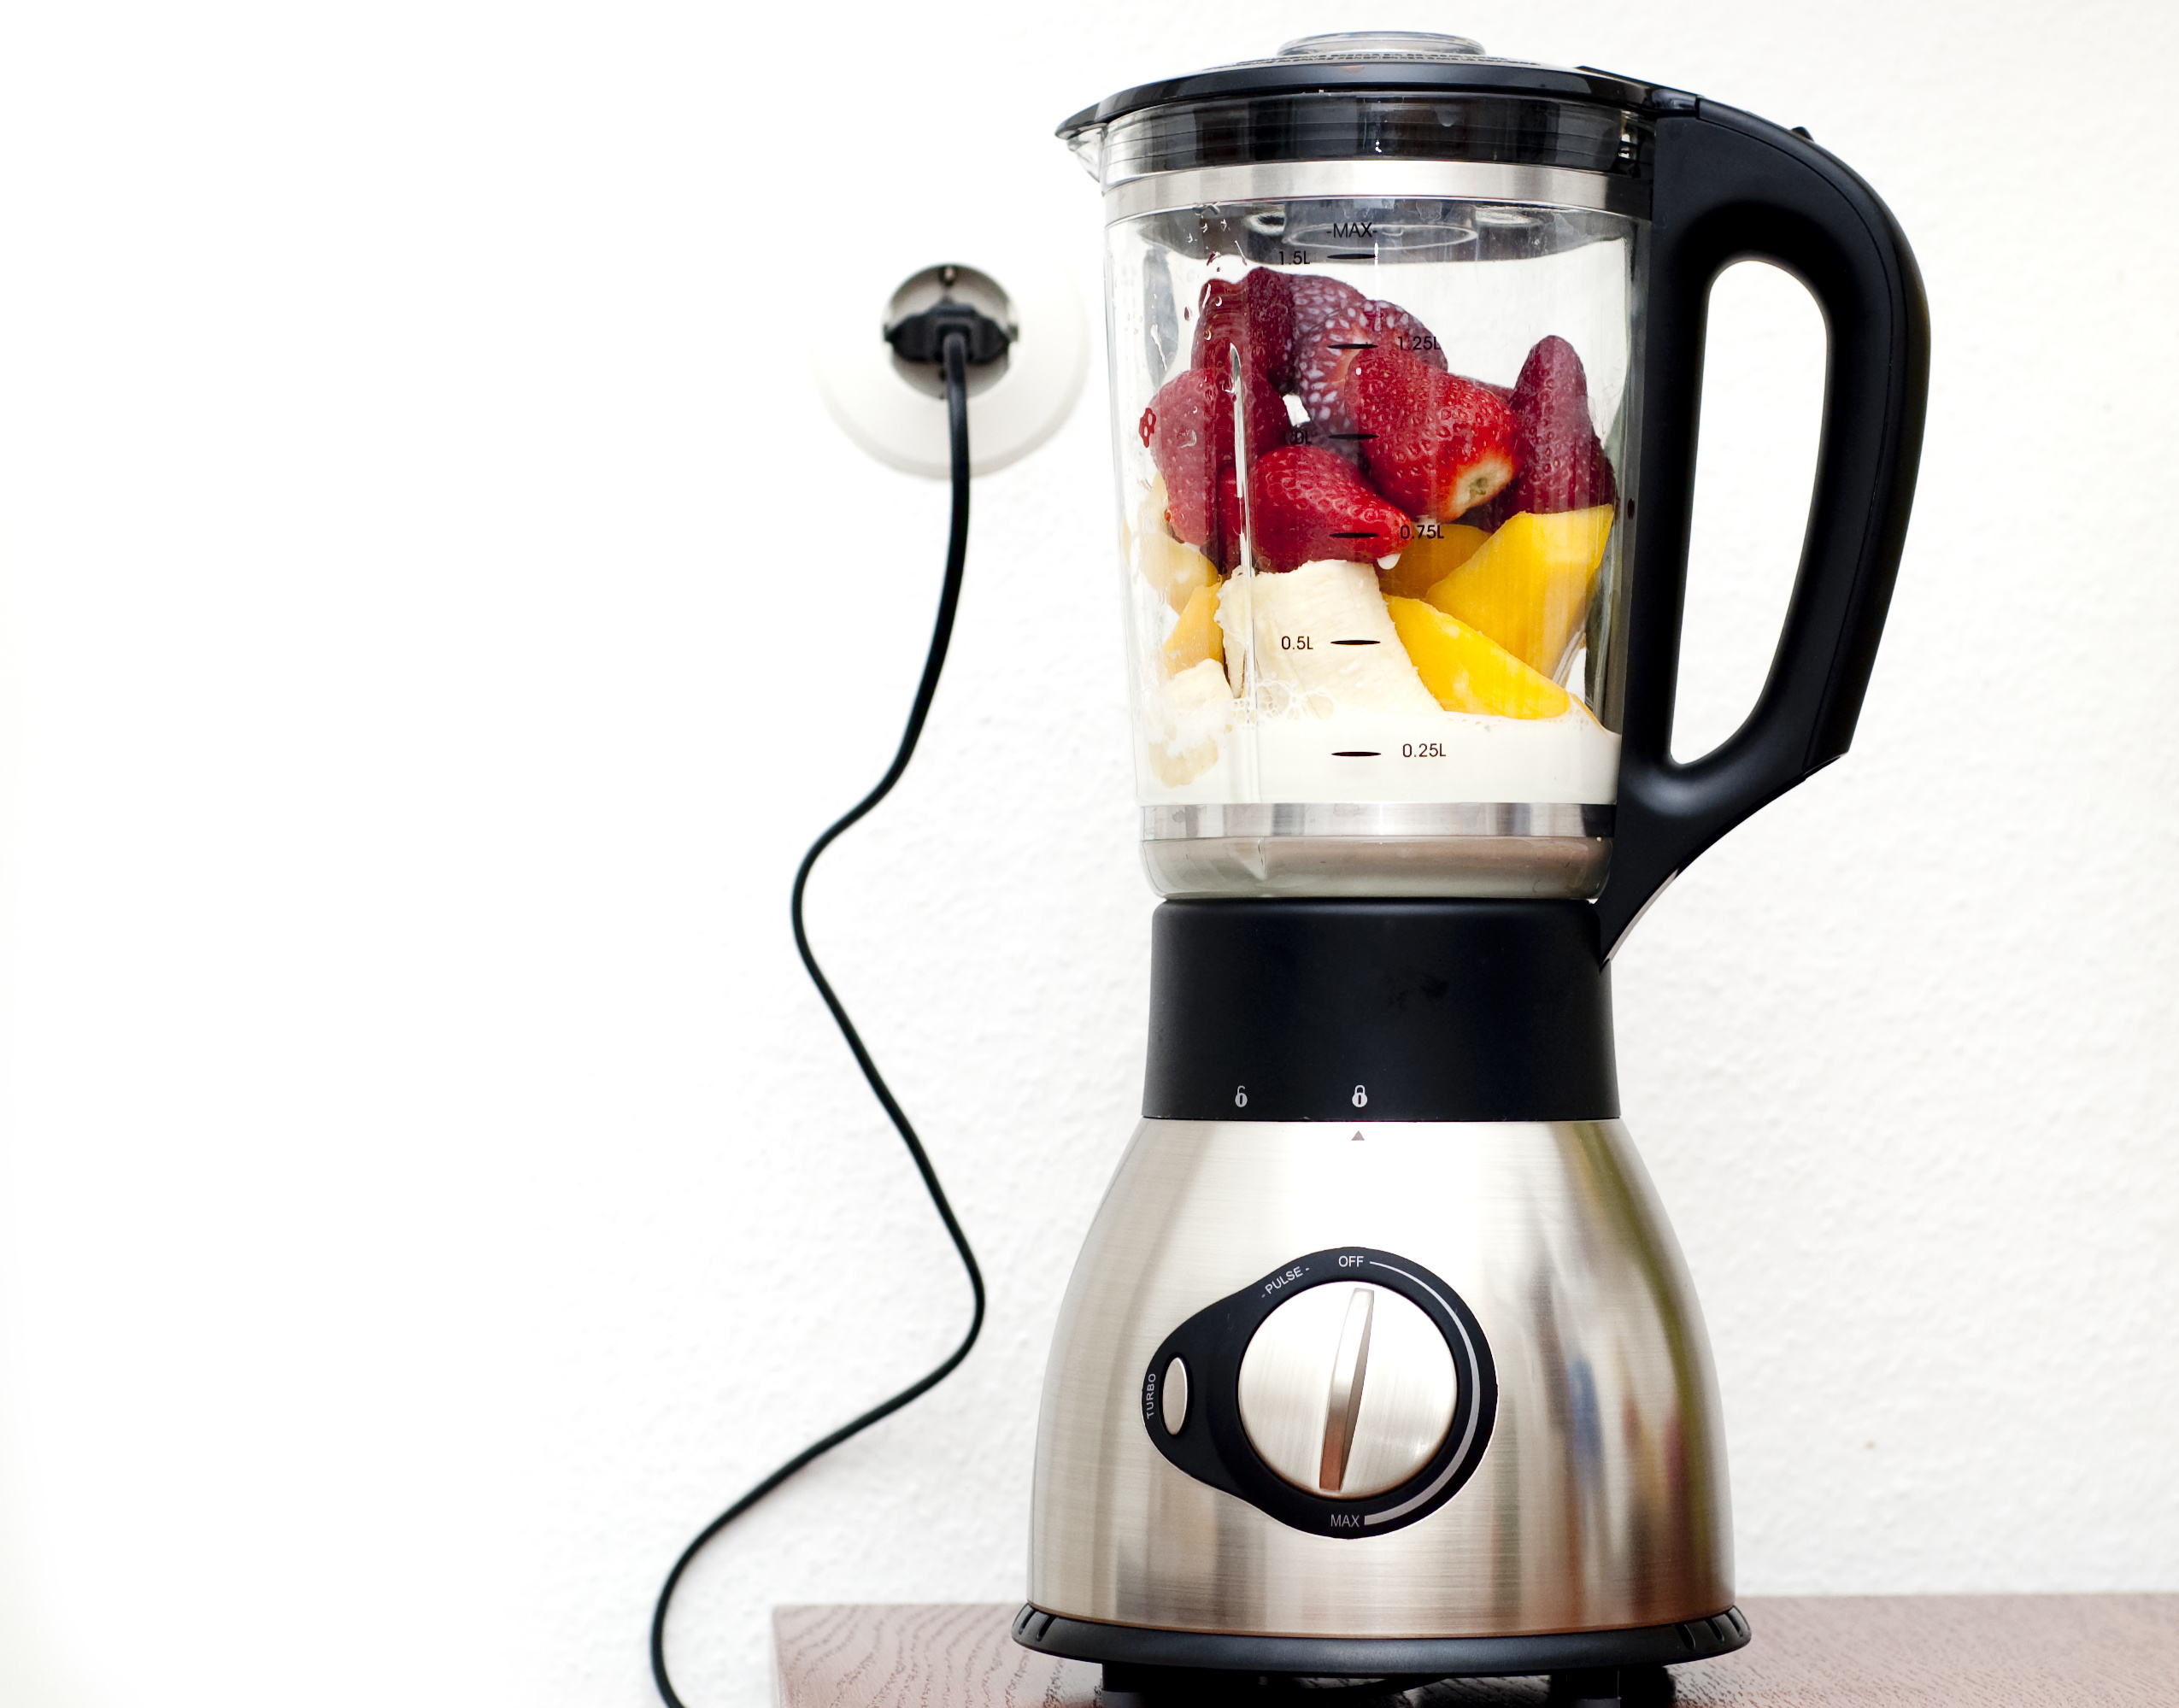 https://www.bestreviewguide.com/images/article/Foods%20you%20should%20never%20put%20in%20the%20blender.jpeg